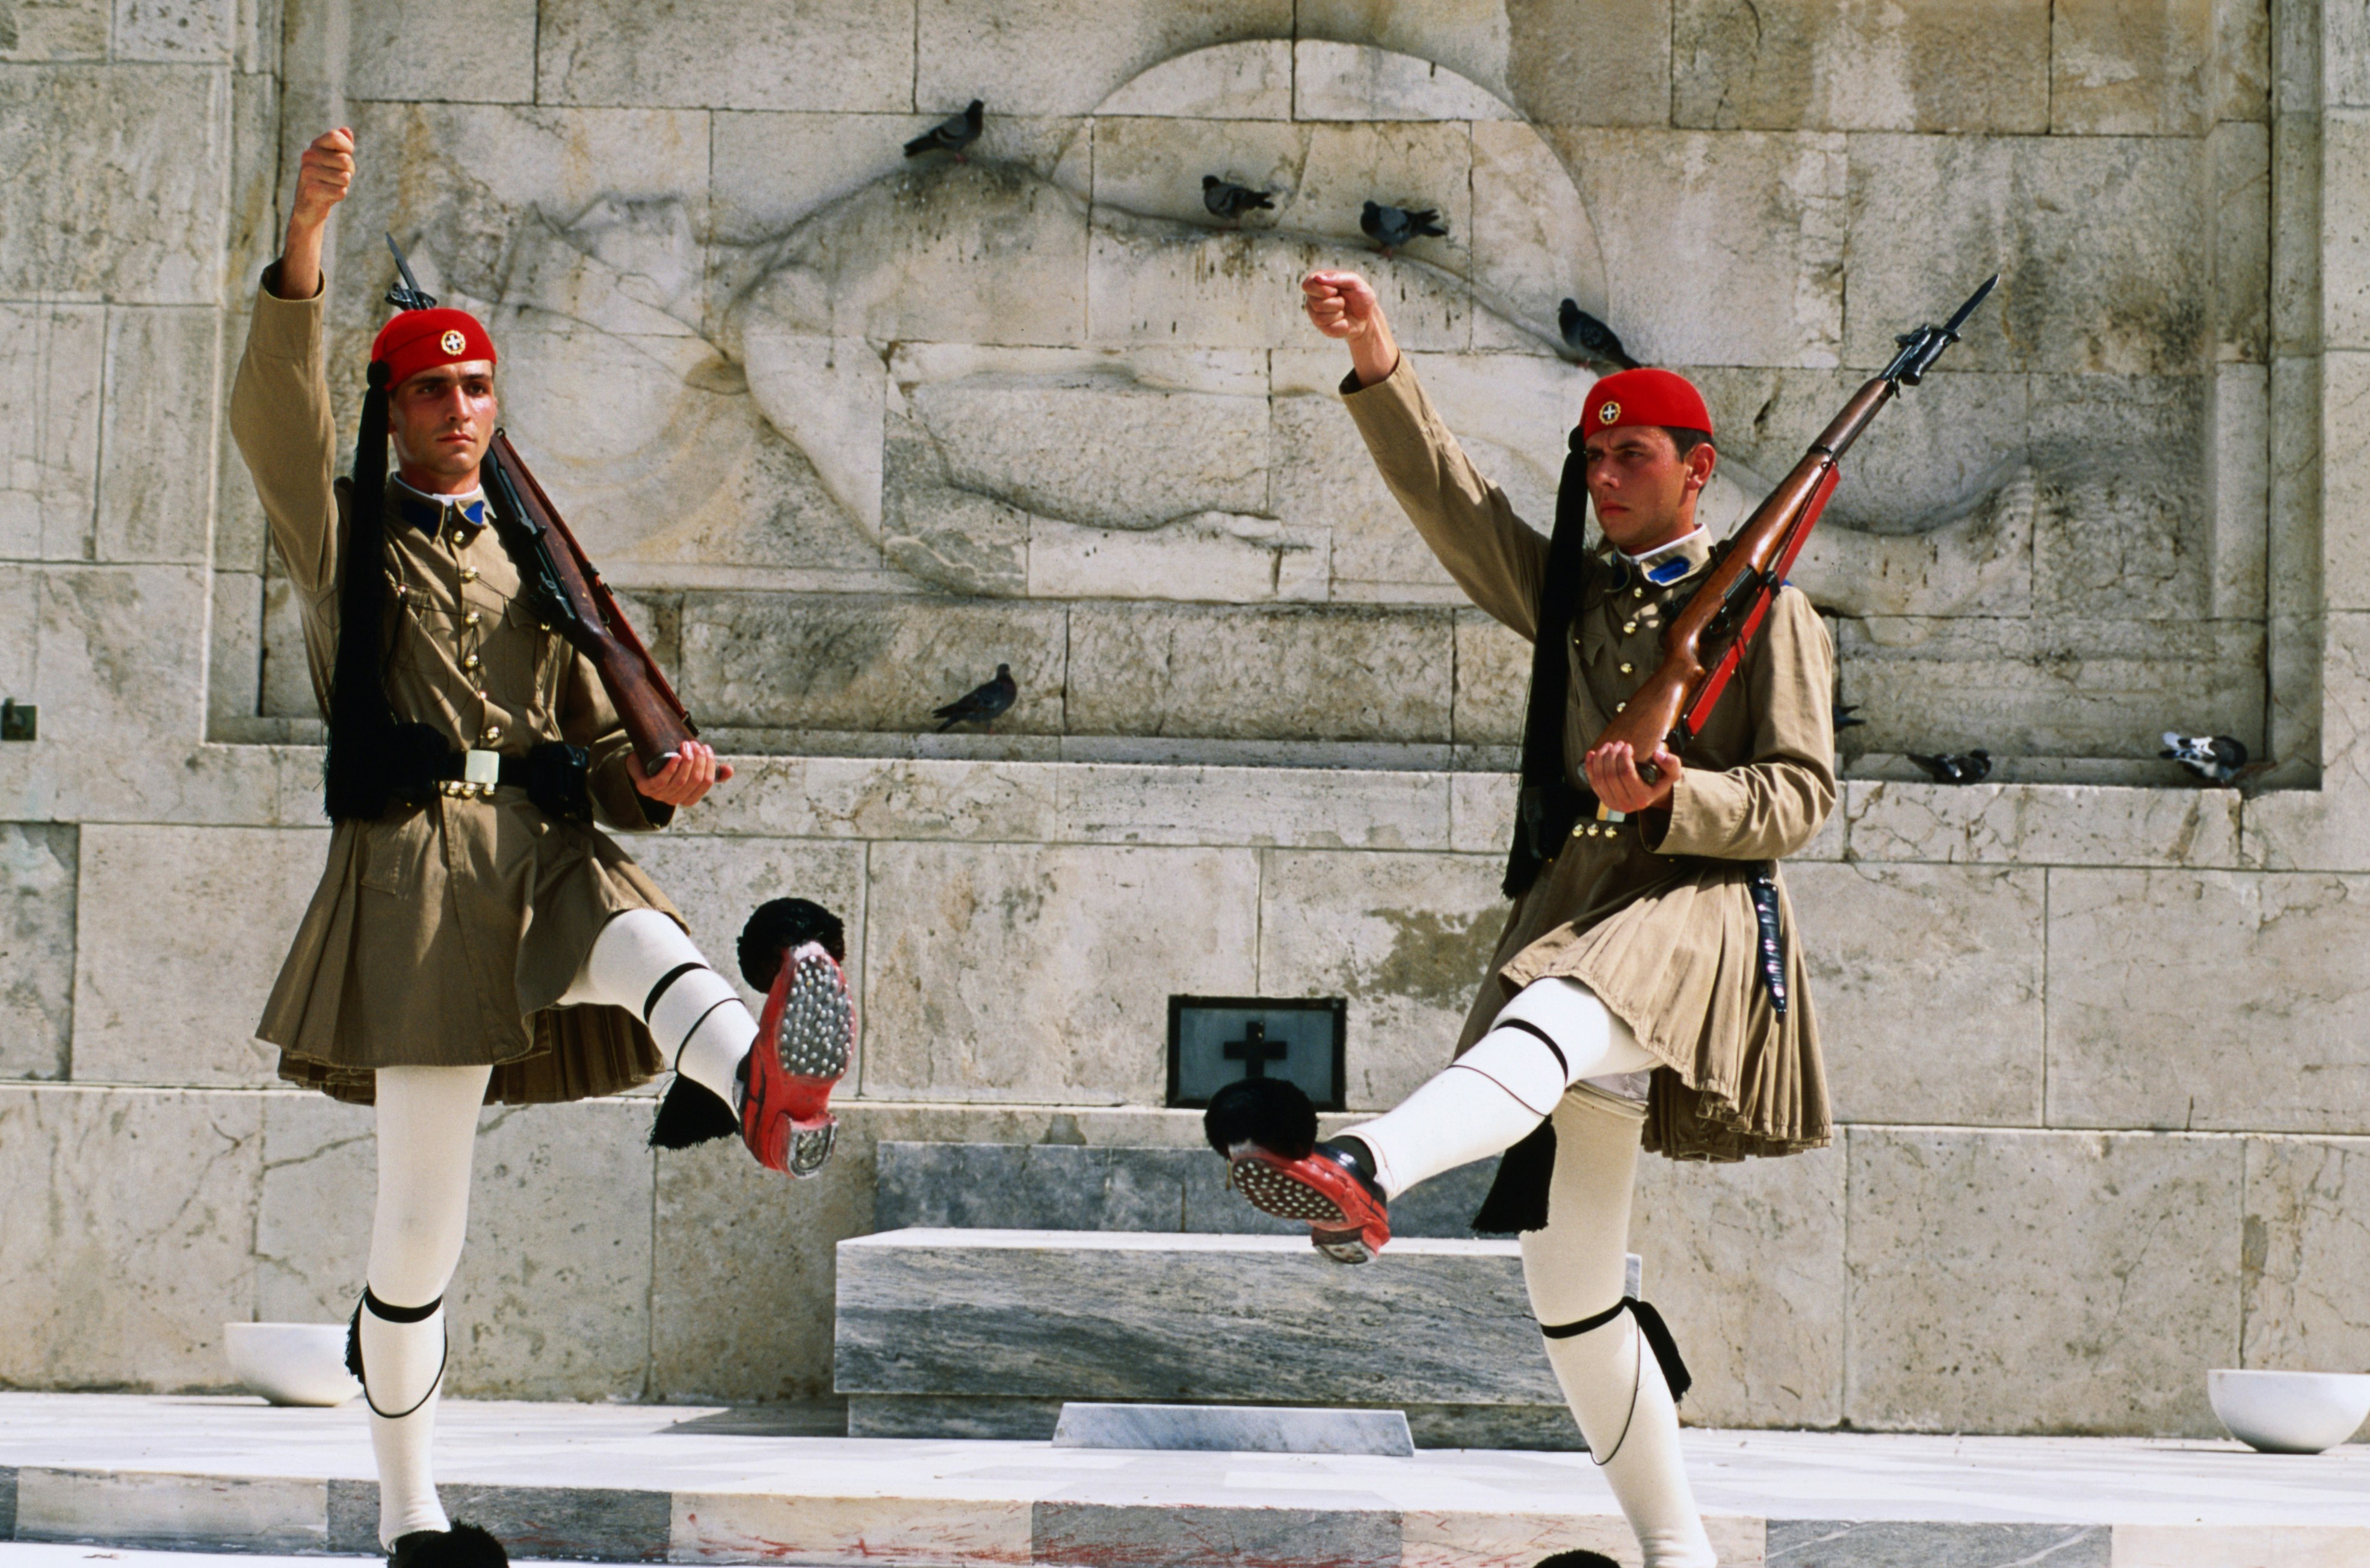 A pair of men wearing traditional garb with stockinged legs, a special kilt, fez hat and pom-pommed shoes each have an arm and a leg raised as they go though the traditional changing of the guard at the tomb of the unknown soldier in Athens